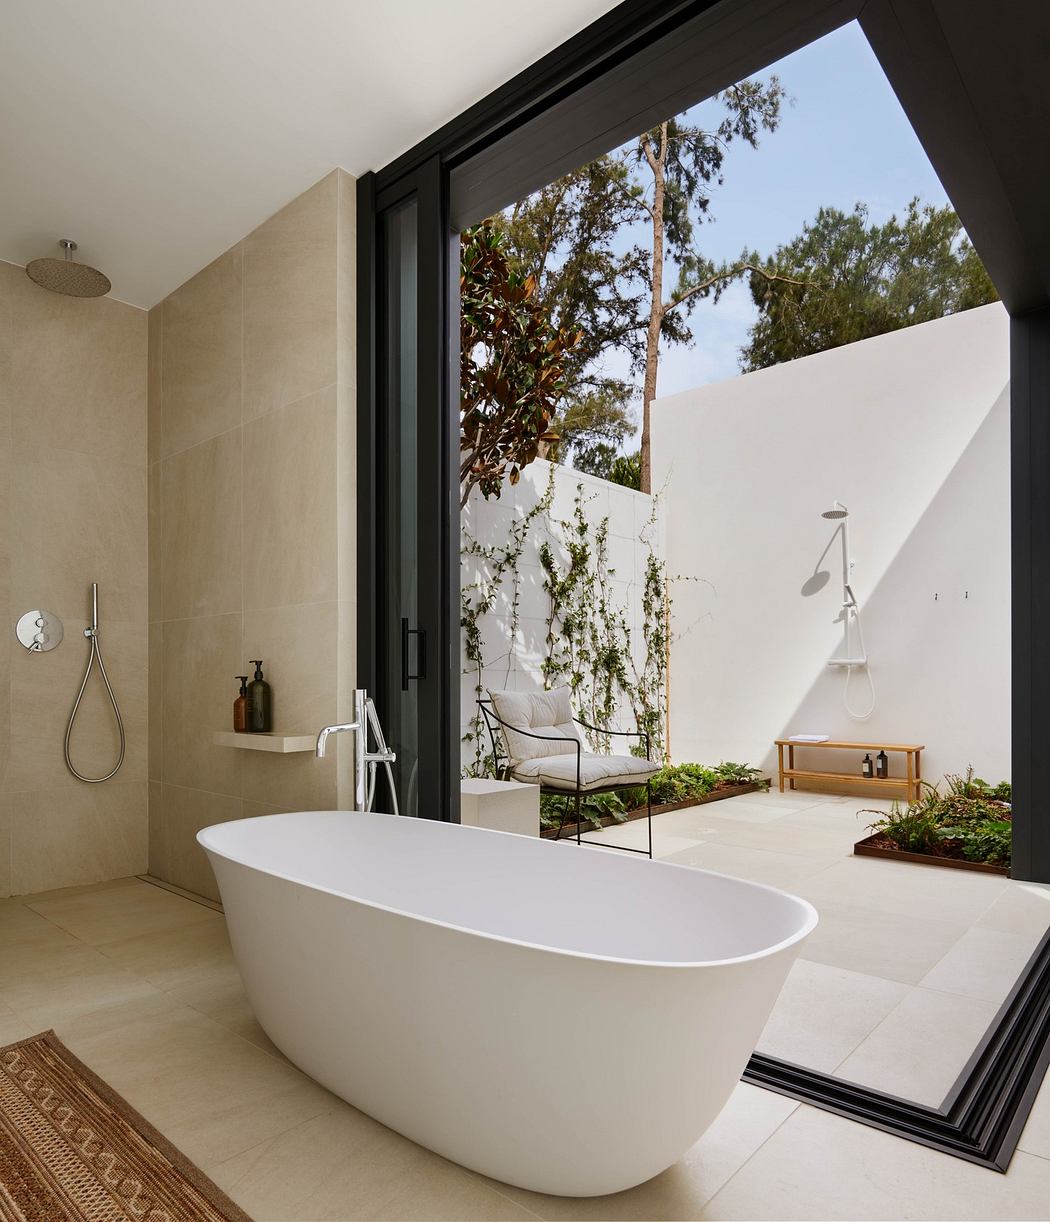 Modern bathroom with standalone tub, open shower, and view of private patio.